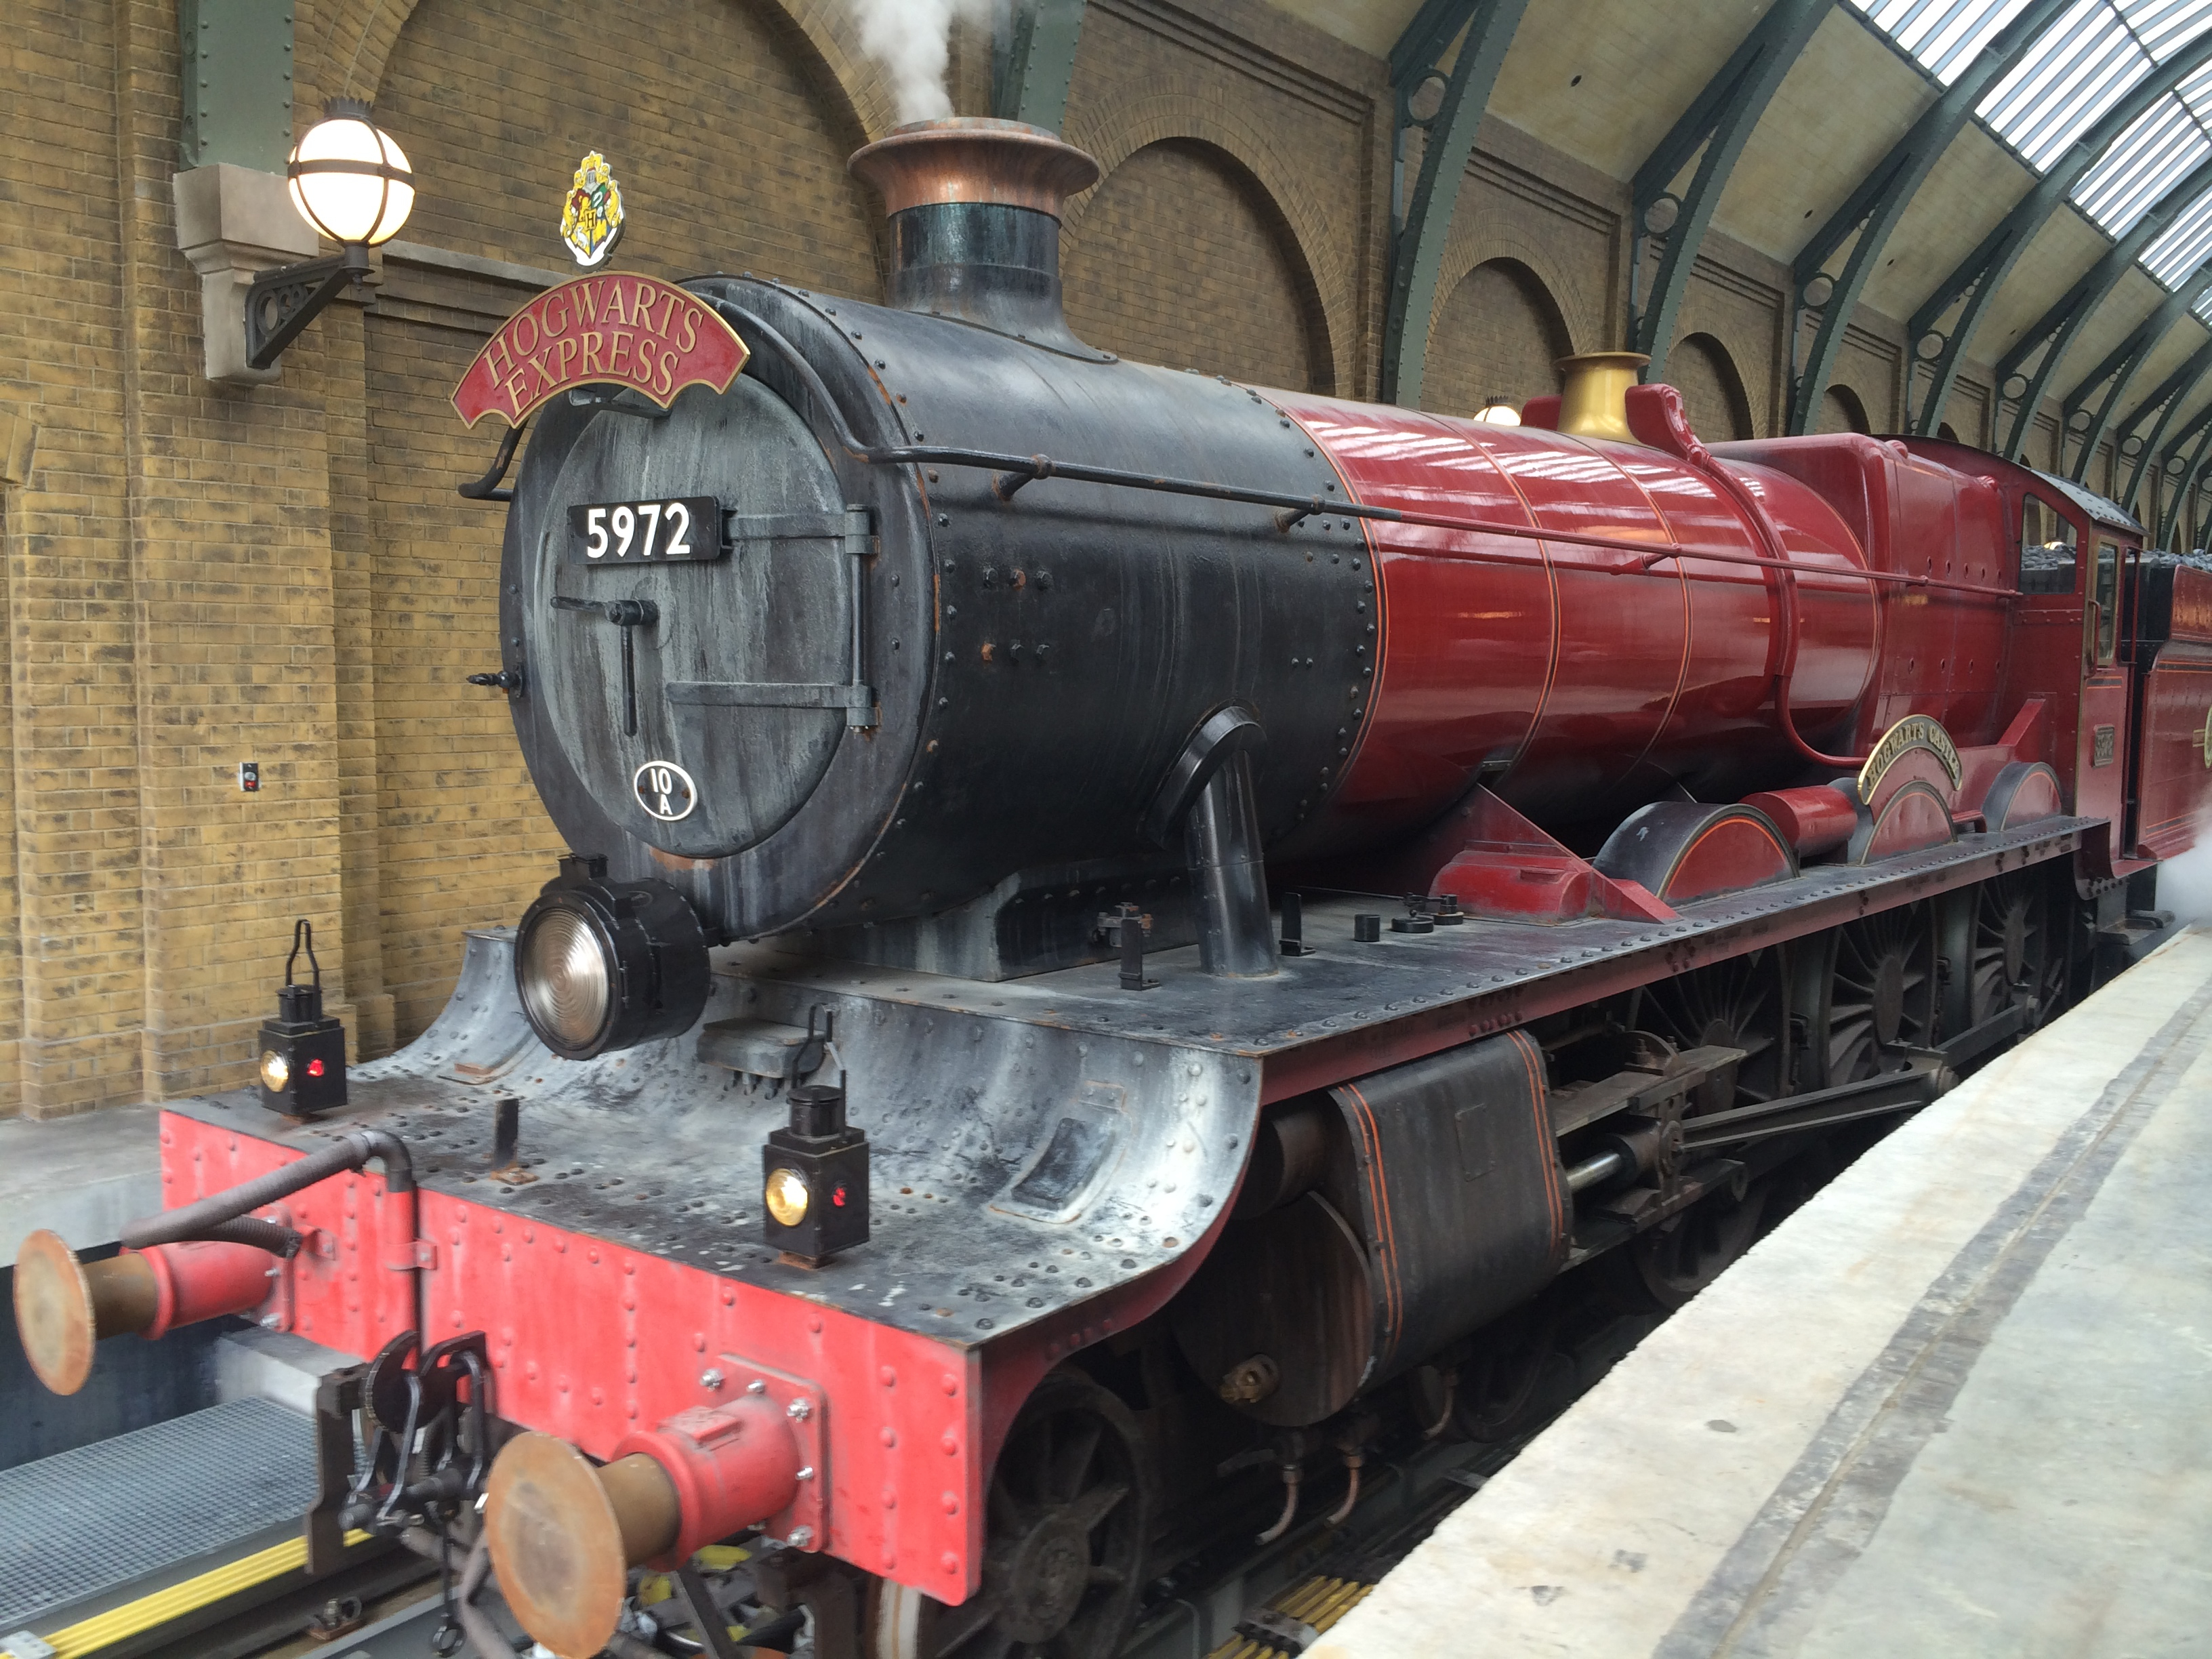 All Aboard the Hogwarts Express